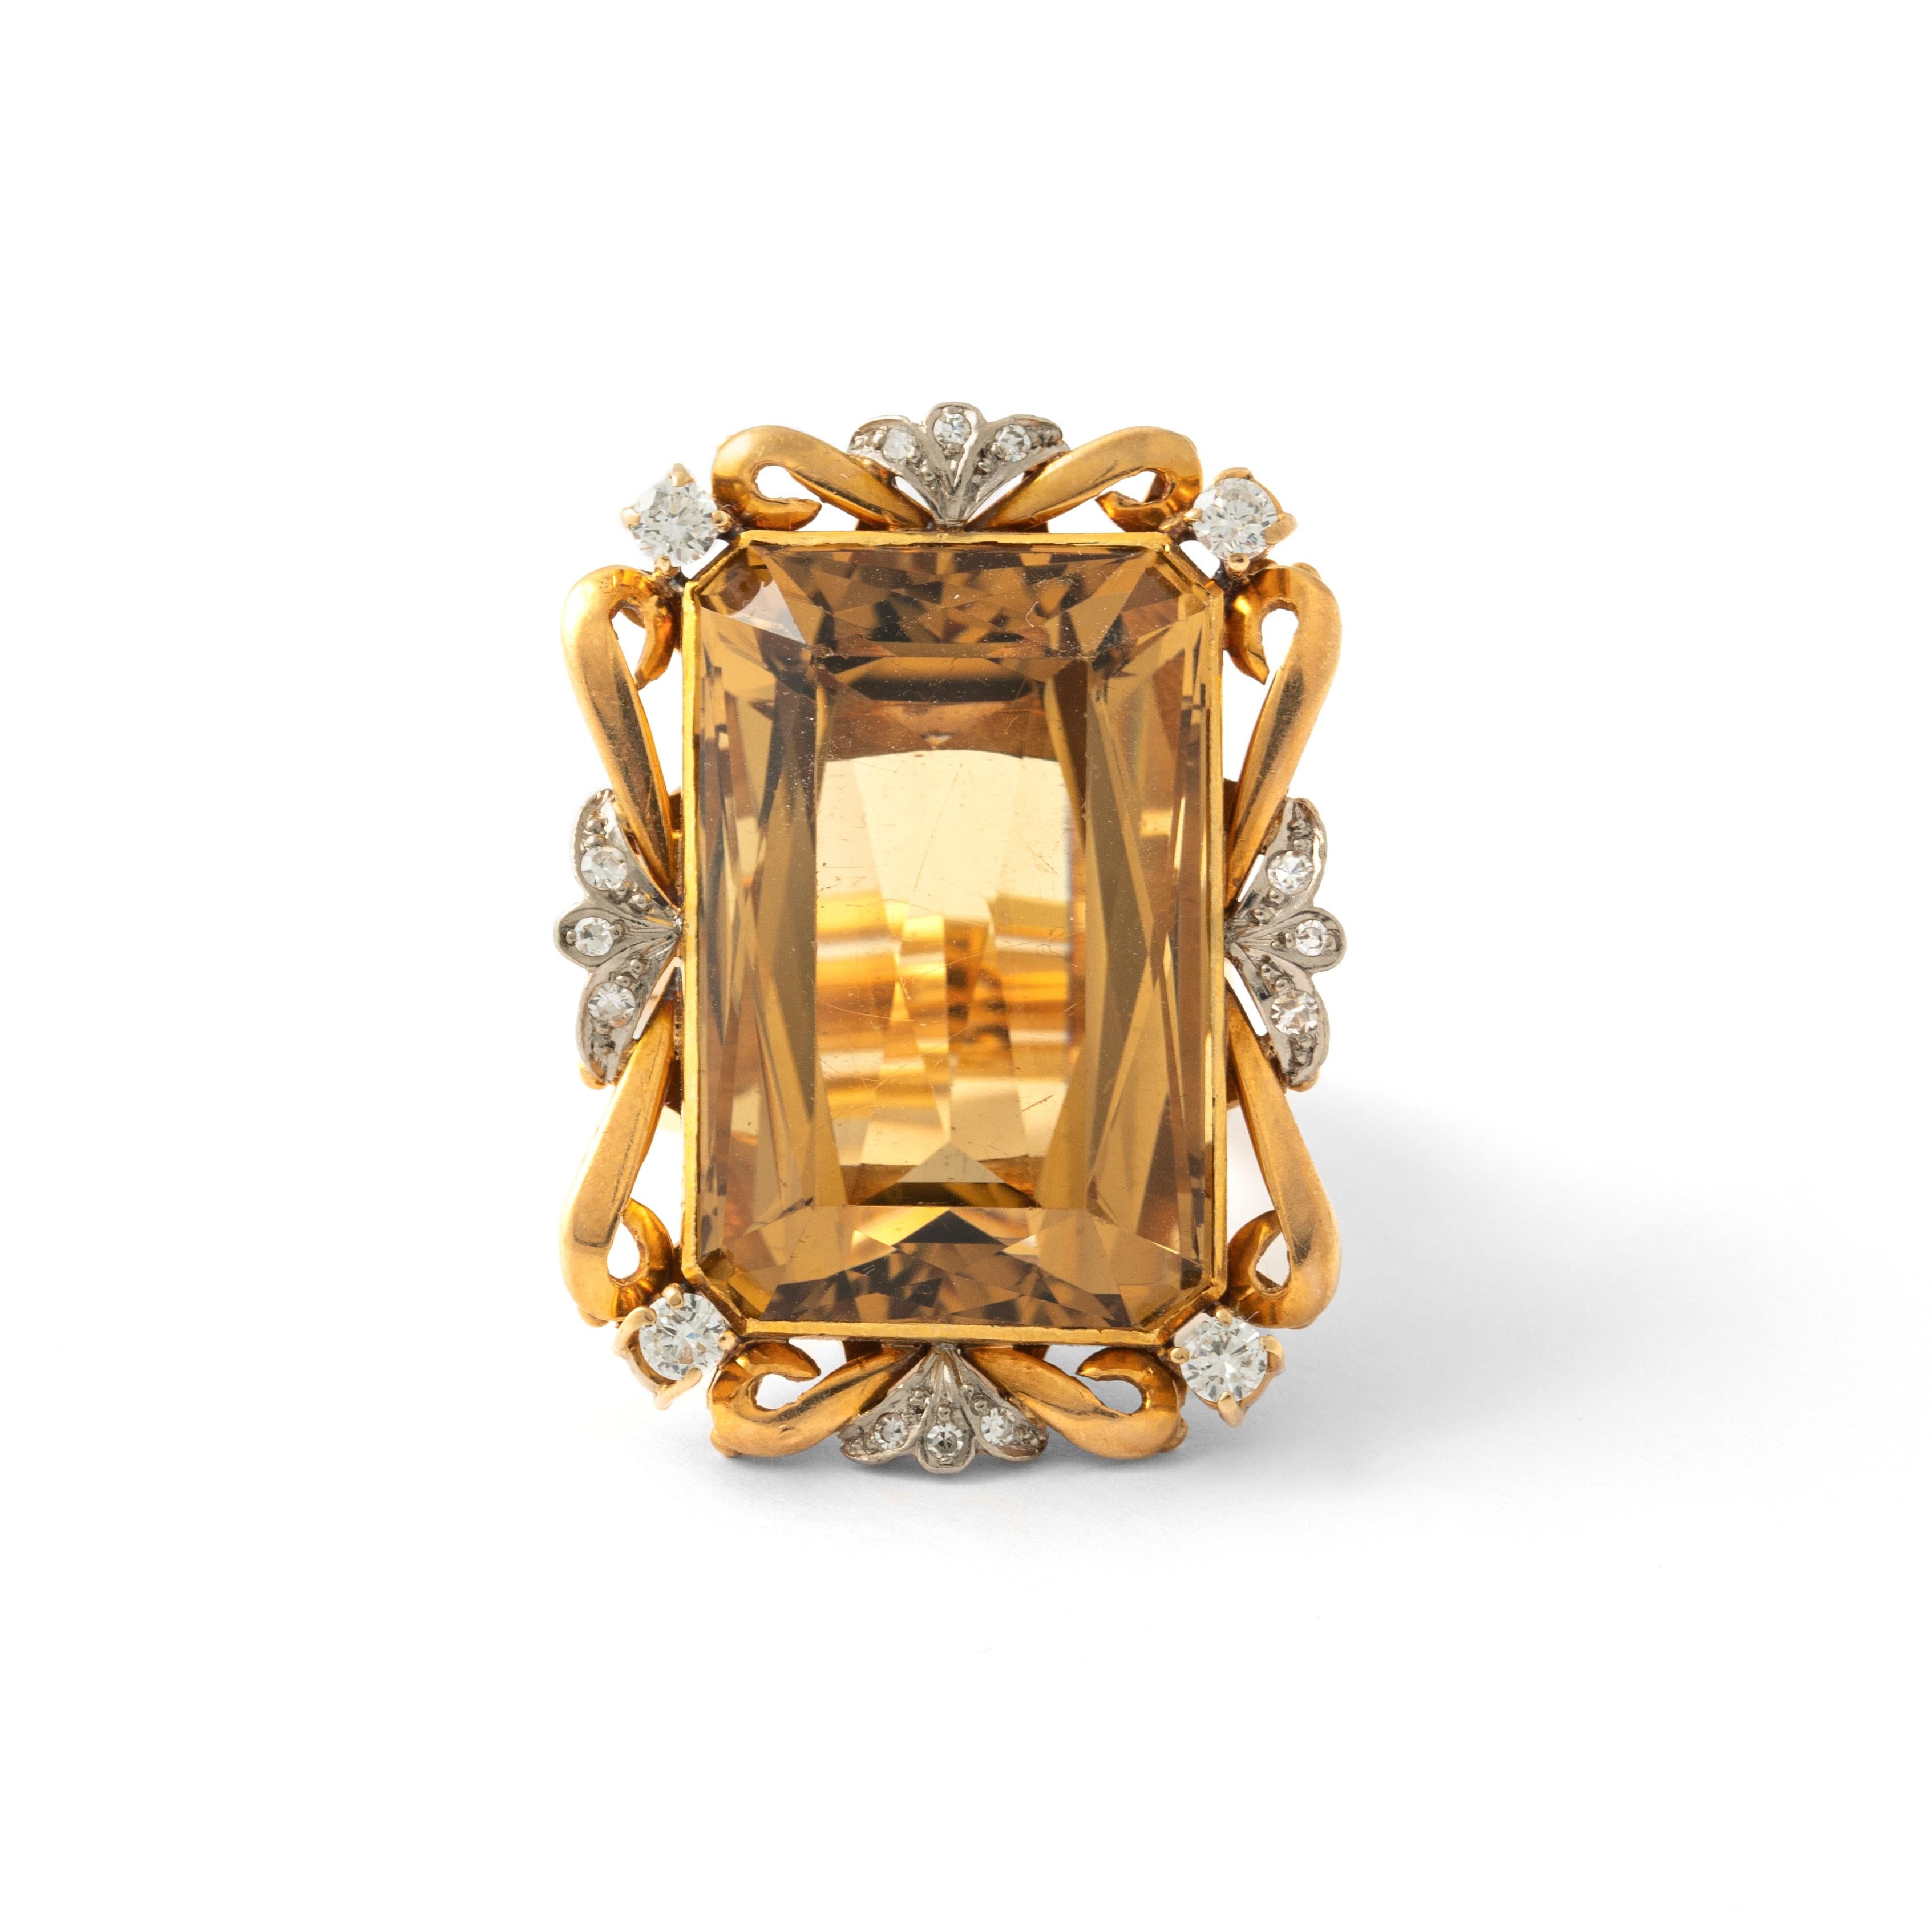 Impressive Citrine Diamond Yellow Gold Ring.
Circa 1950.490
Total length: approx. 3.60 centimeters.
Total width: approx. 2.60 centimeters.

Ring size: 60 / 9.25 US
Total weight: 32.53 grams.
